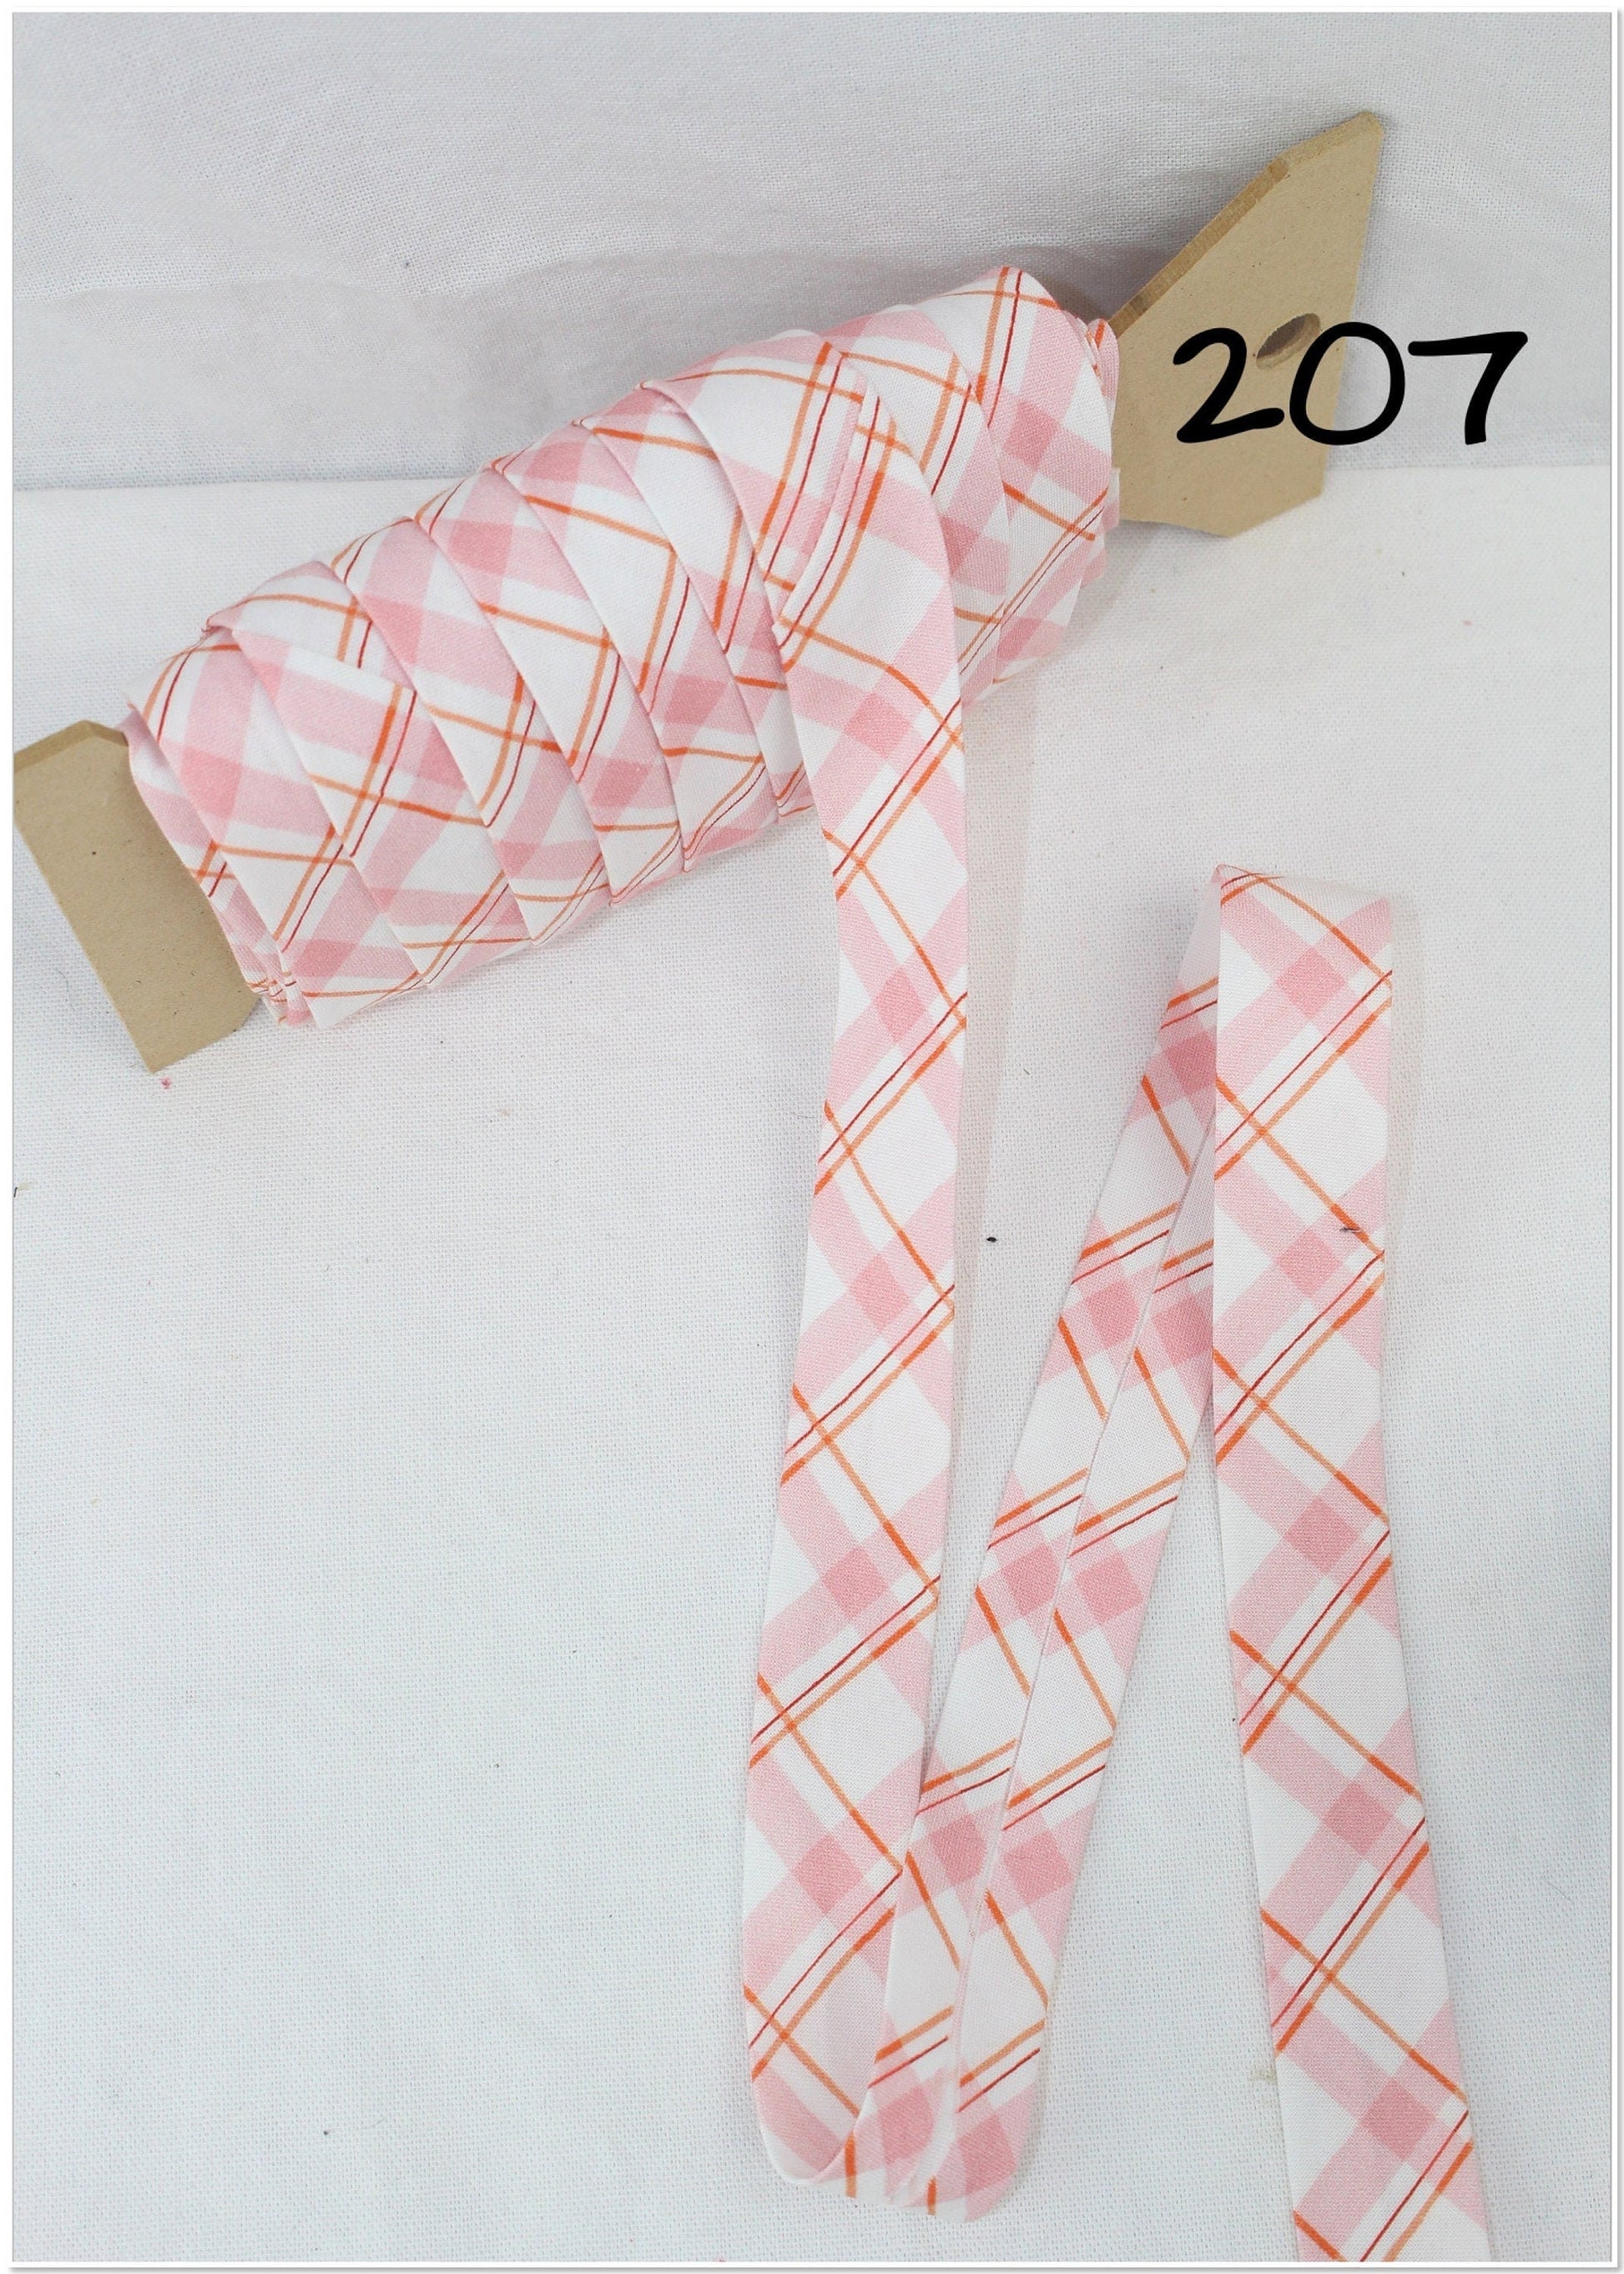 Bias Binding (Tape) 25mm, Cotton, Single Fold, pink ribbon, pink, patterned. Fusible iron on available.